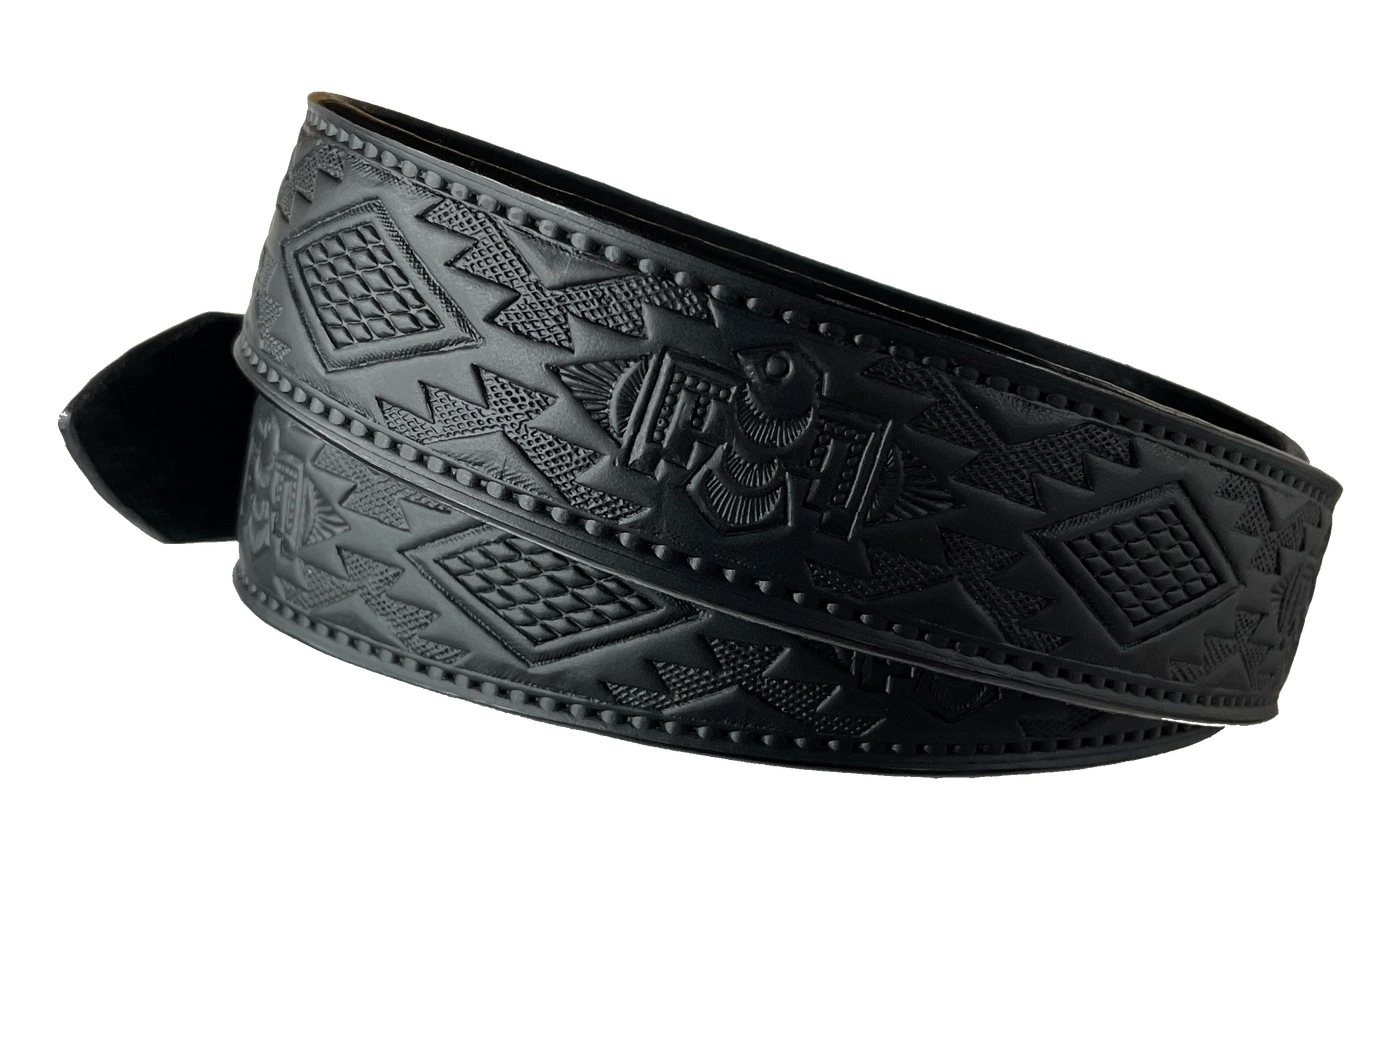 he Holliday has a Southwest design embossed onto belt Full grain American vegetable tanned cowhide approx. 1/8"thick. Width 1 1/2" and includes Antique Nickle plated Solid Brass buckle Hand Finished in 4 color options Smooth burnished painted edges Choose with or without name, if without name, design will cover entire length of belt. back of black belt pictured. Made in our shop in Smyrna, TN, just outside of Nashville.